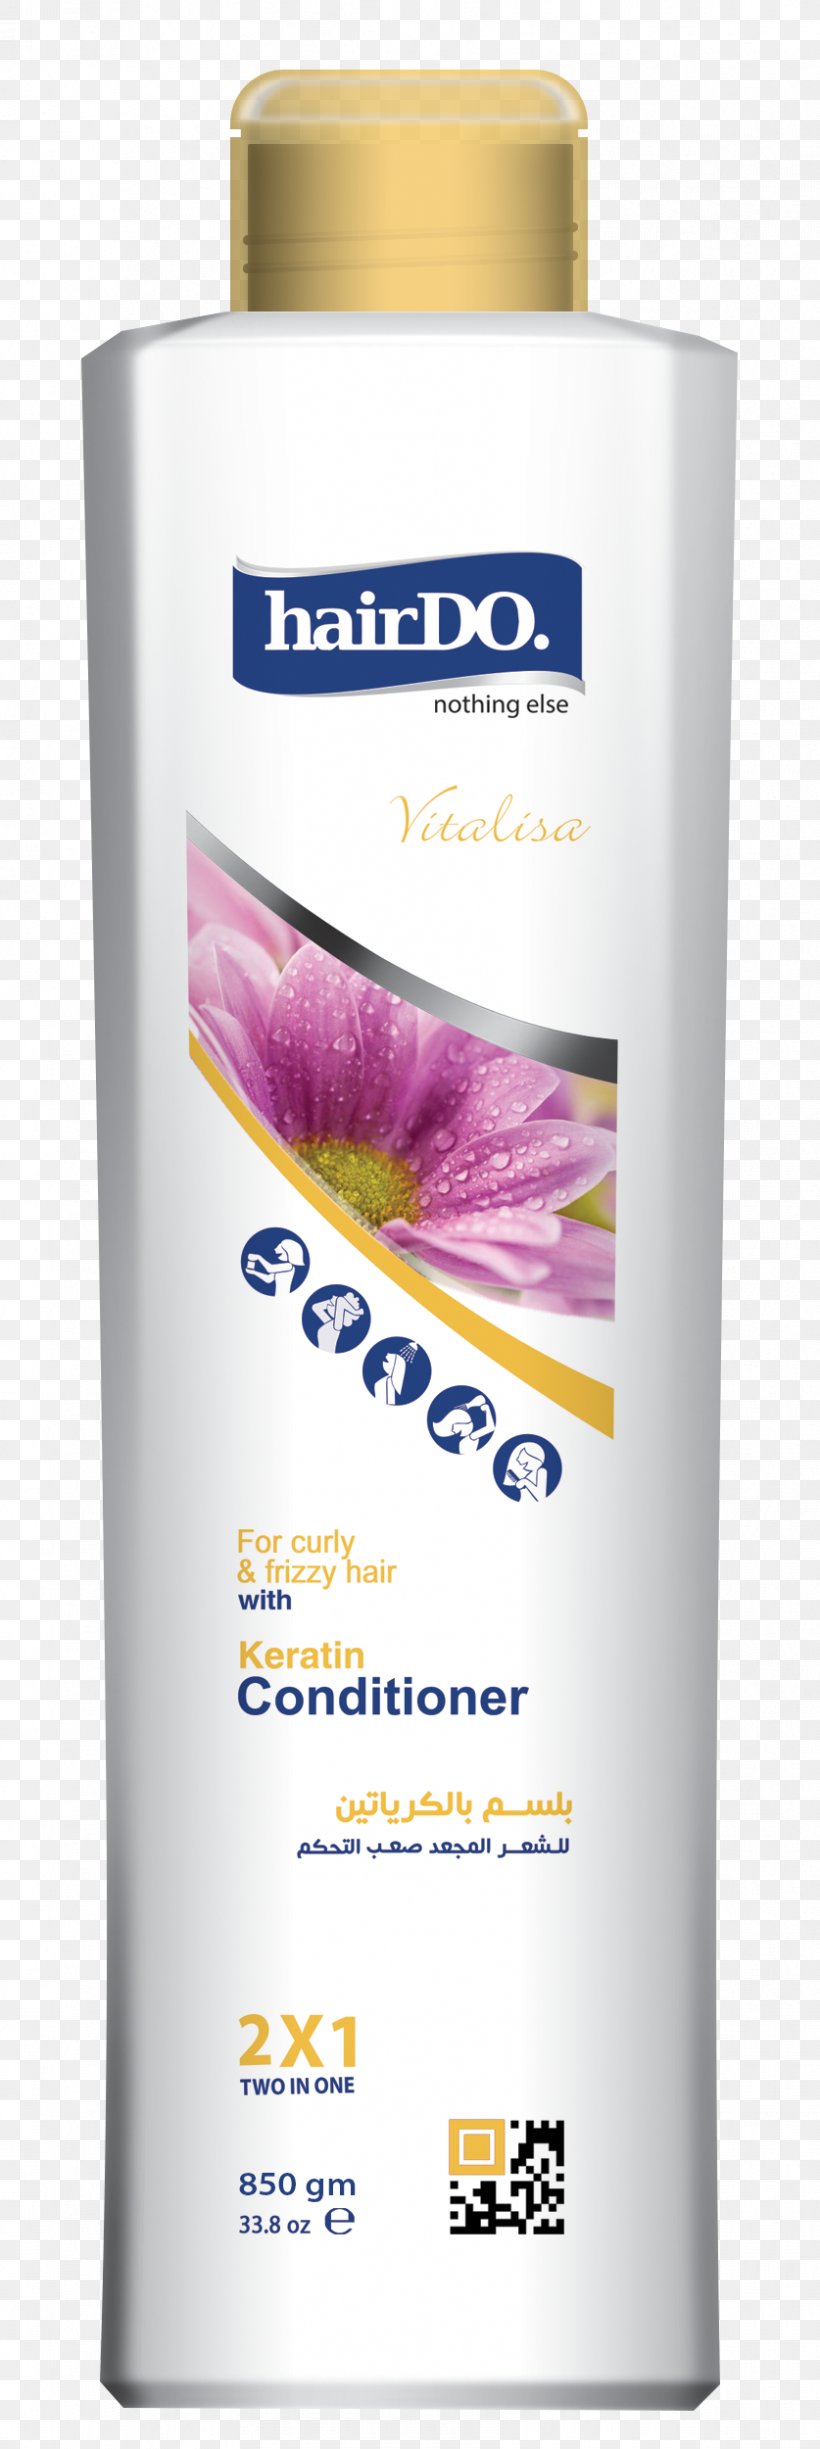 Lotion Cosmeceutical Cosmetics Skin Care Egypt, PNG, 837x2500px, Lotion, Business, Cosmeceutical, Cosmetics, Egypt Download Free